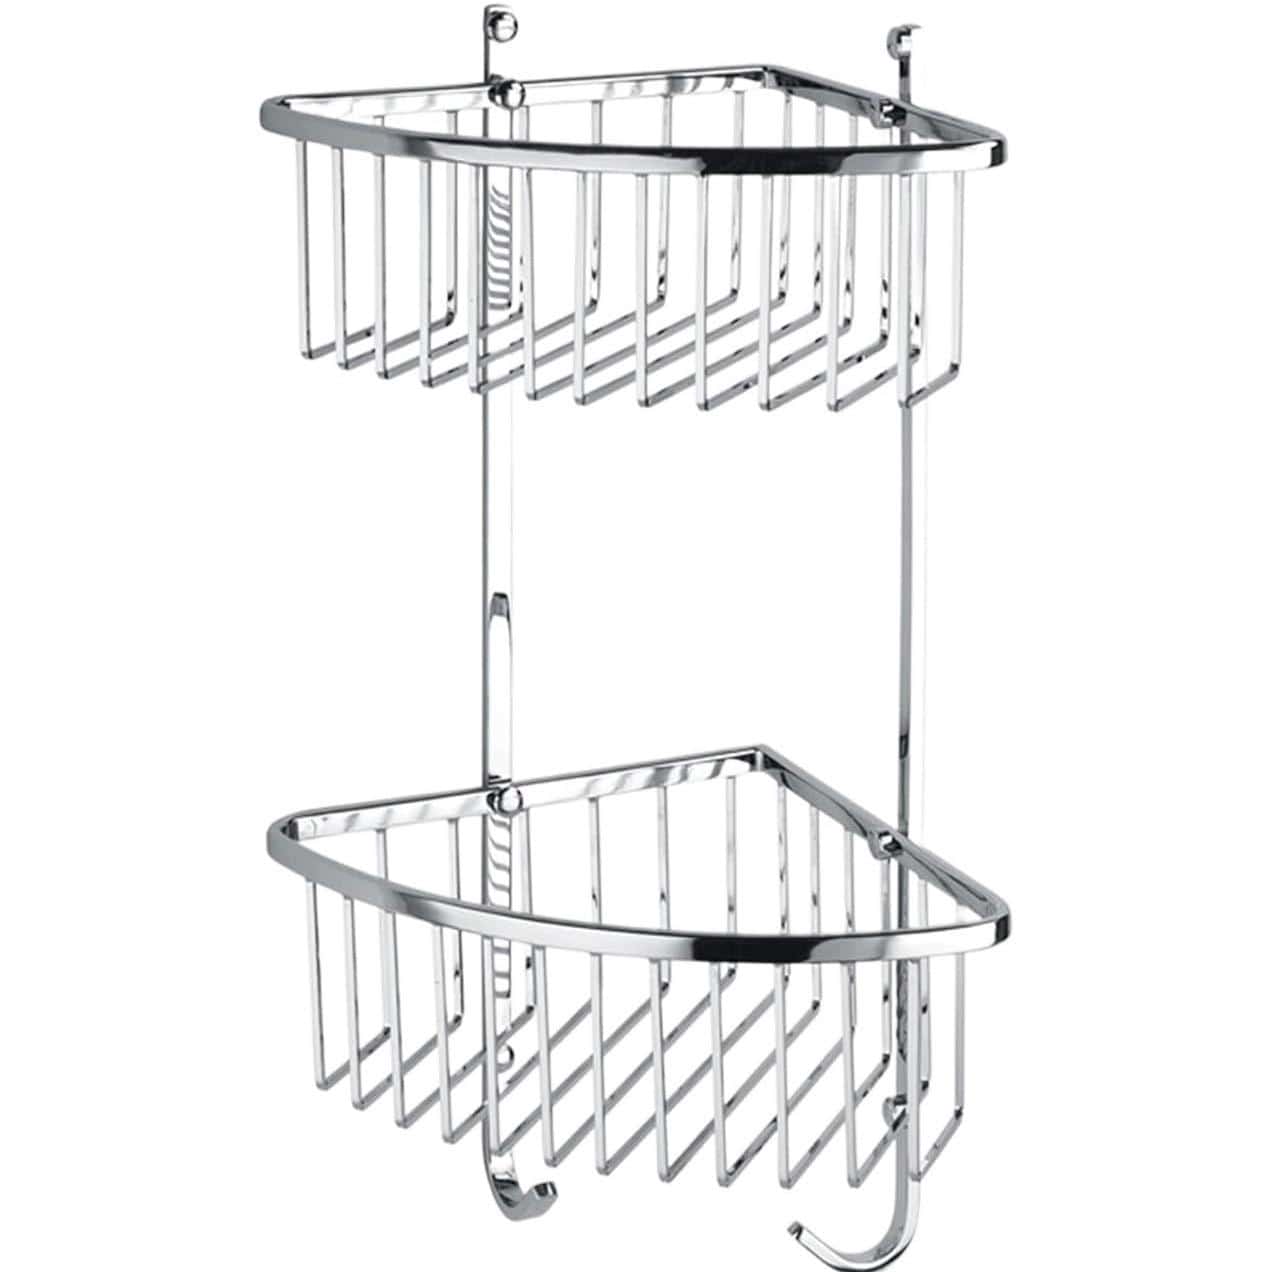 Shop Bathroom Stainless Steel Chrome Corner 2 Tier Shower Caddy Basket with Hooks - NB032 | Buy Online at Supply Master Accra, Ghana Bathroom Accessories Buy Tools hardware Building materials